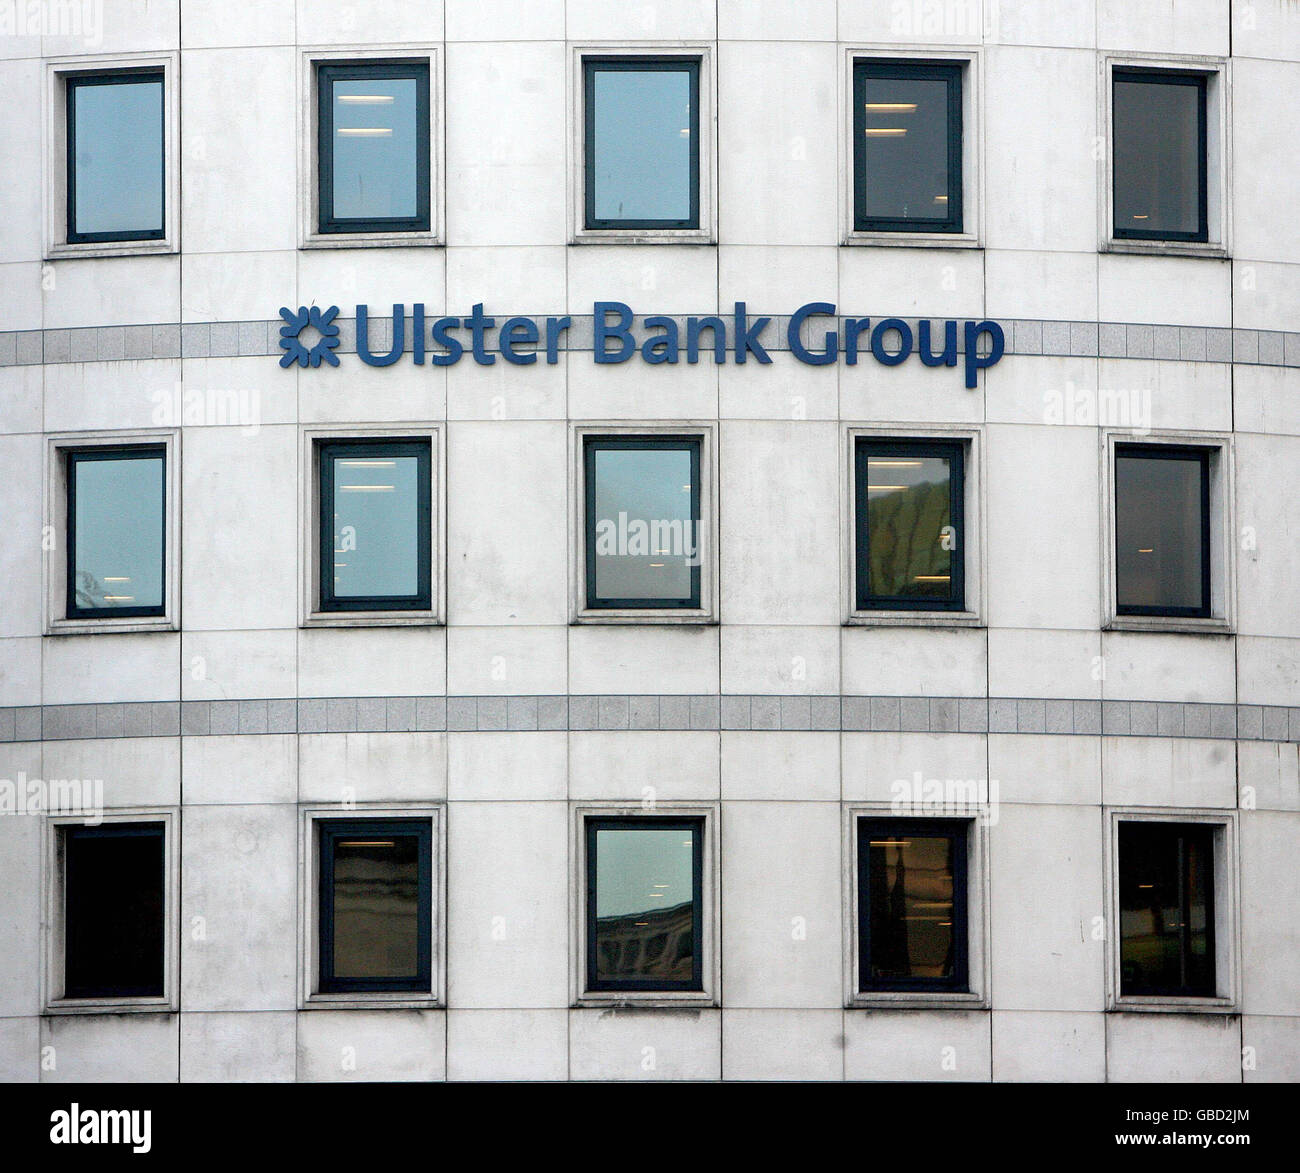 Ulster Bank announces job cuts. The Ulster Bank Headquarters in Dublin city centre. Stock Photo